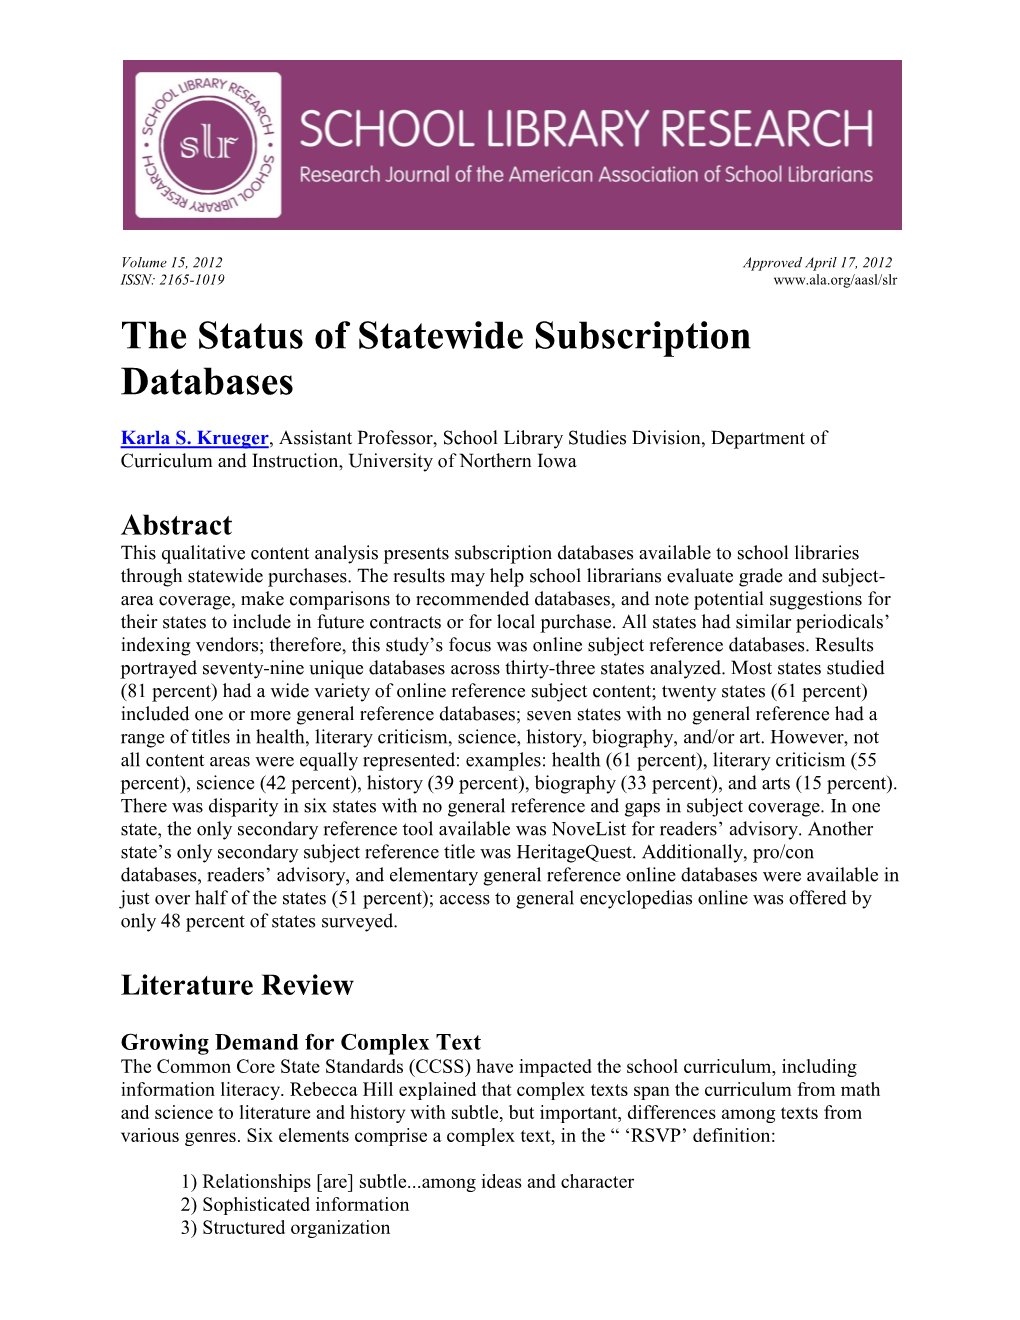 The Status of Statewide Subscription Databases